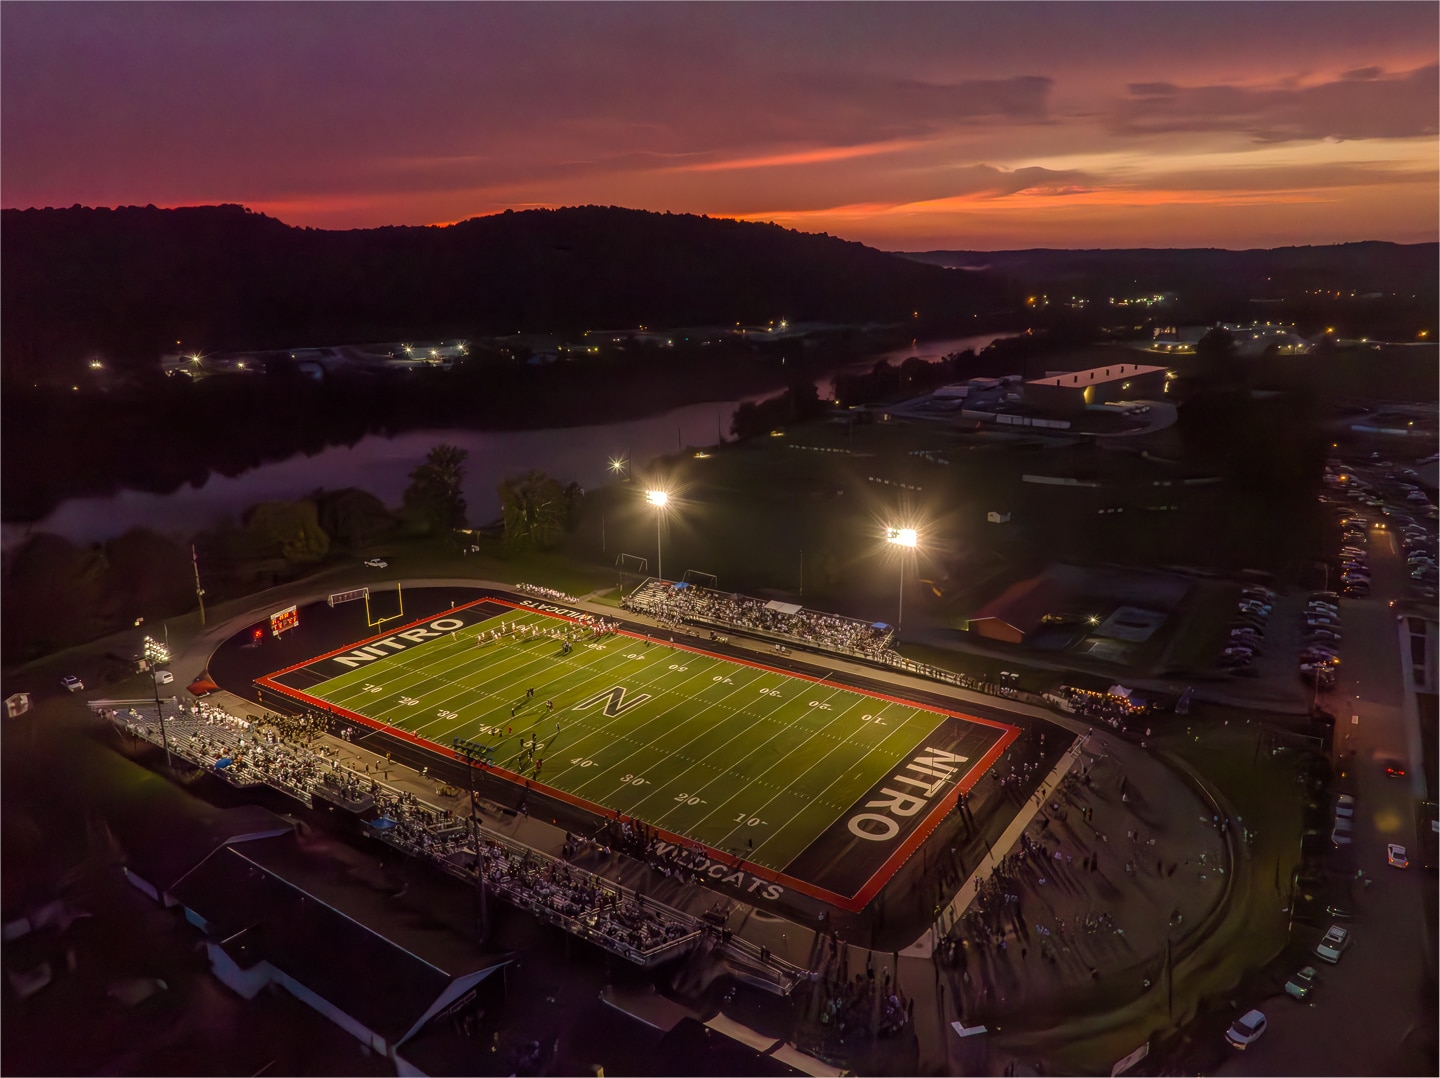 Aerial view of a high school football game at sunset, with stadium lights illuminating the field.